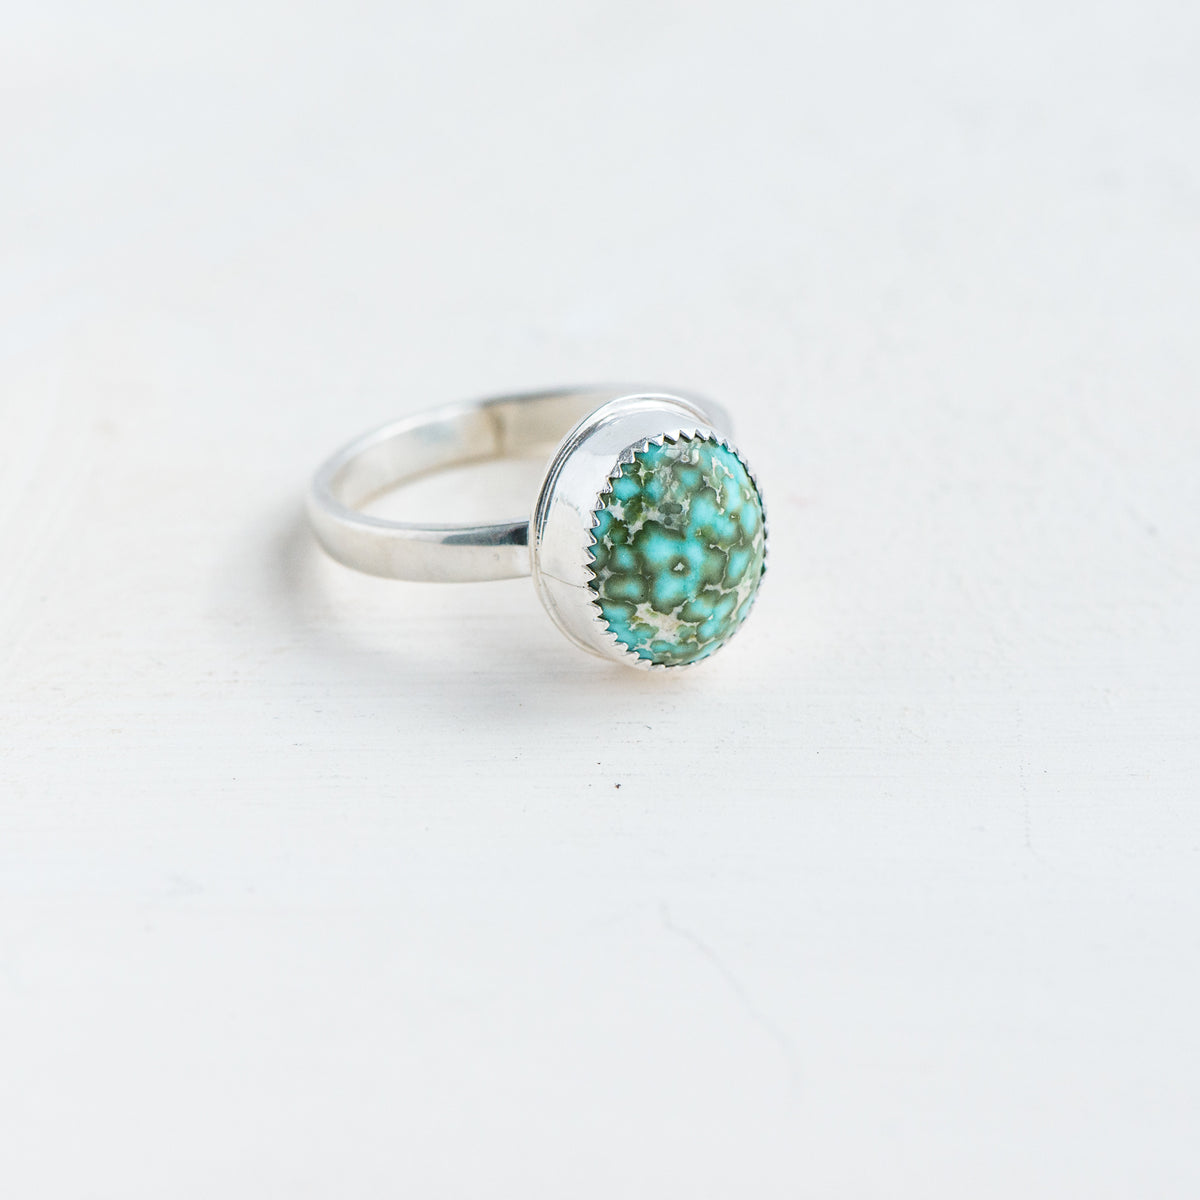 Sonoran Turquoise with Serrated Surround and Thin Silver Ring